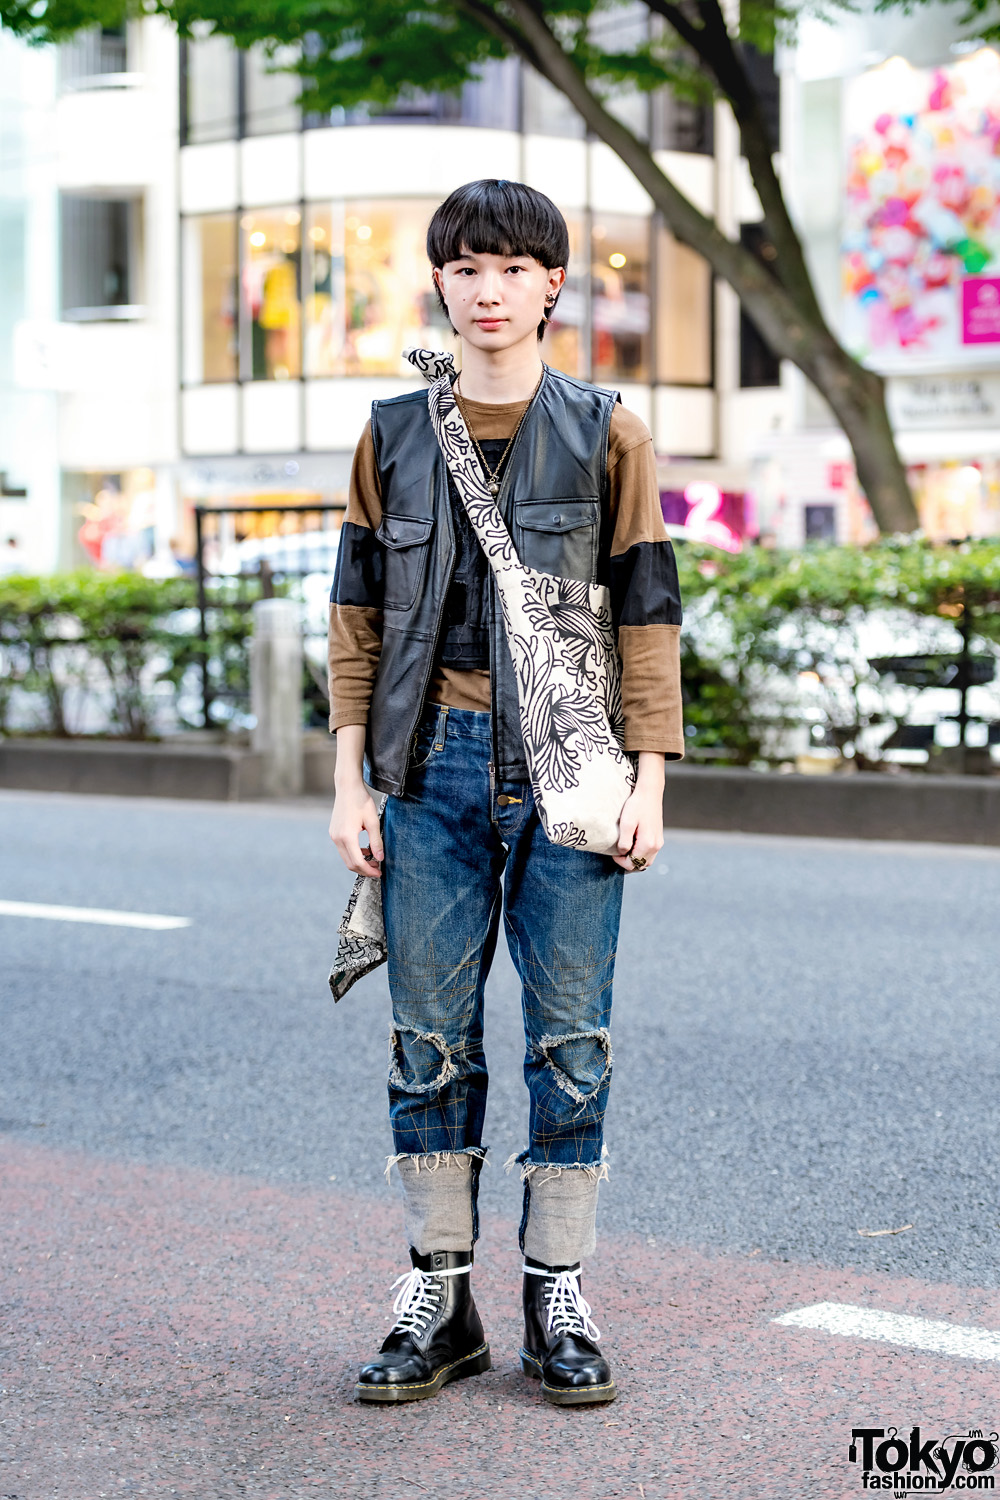 Christopher Nemeth Rope Print Fashion in Harajuku w/ Beret, Layered Tops,  Wide Leg Shorts & Leather Shoes – Tokyo Fashion